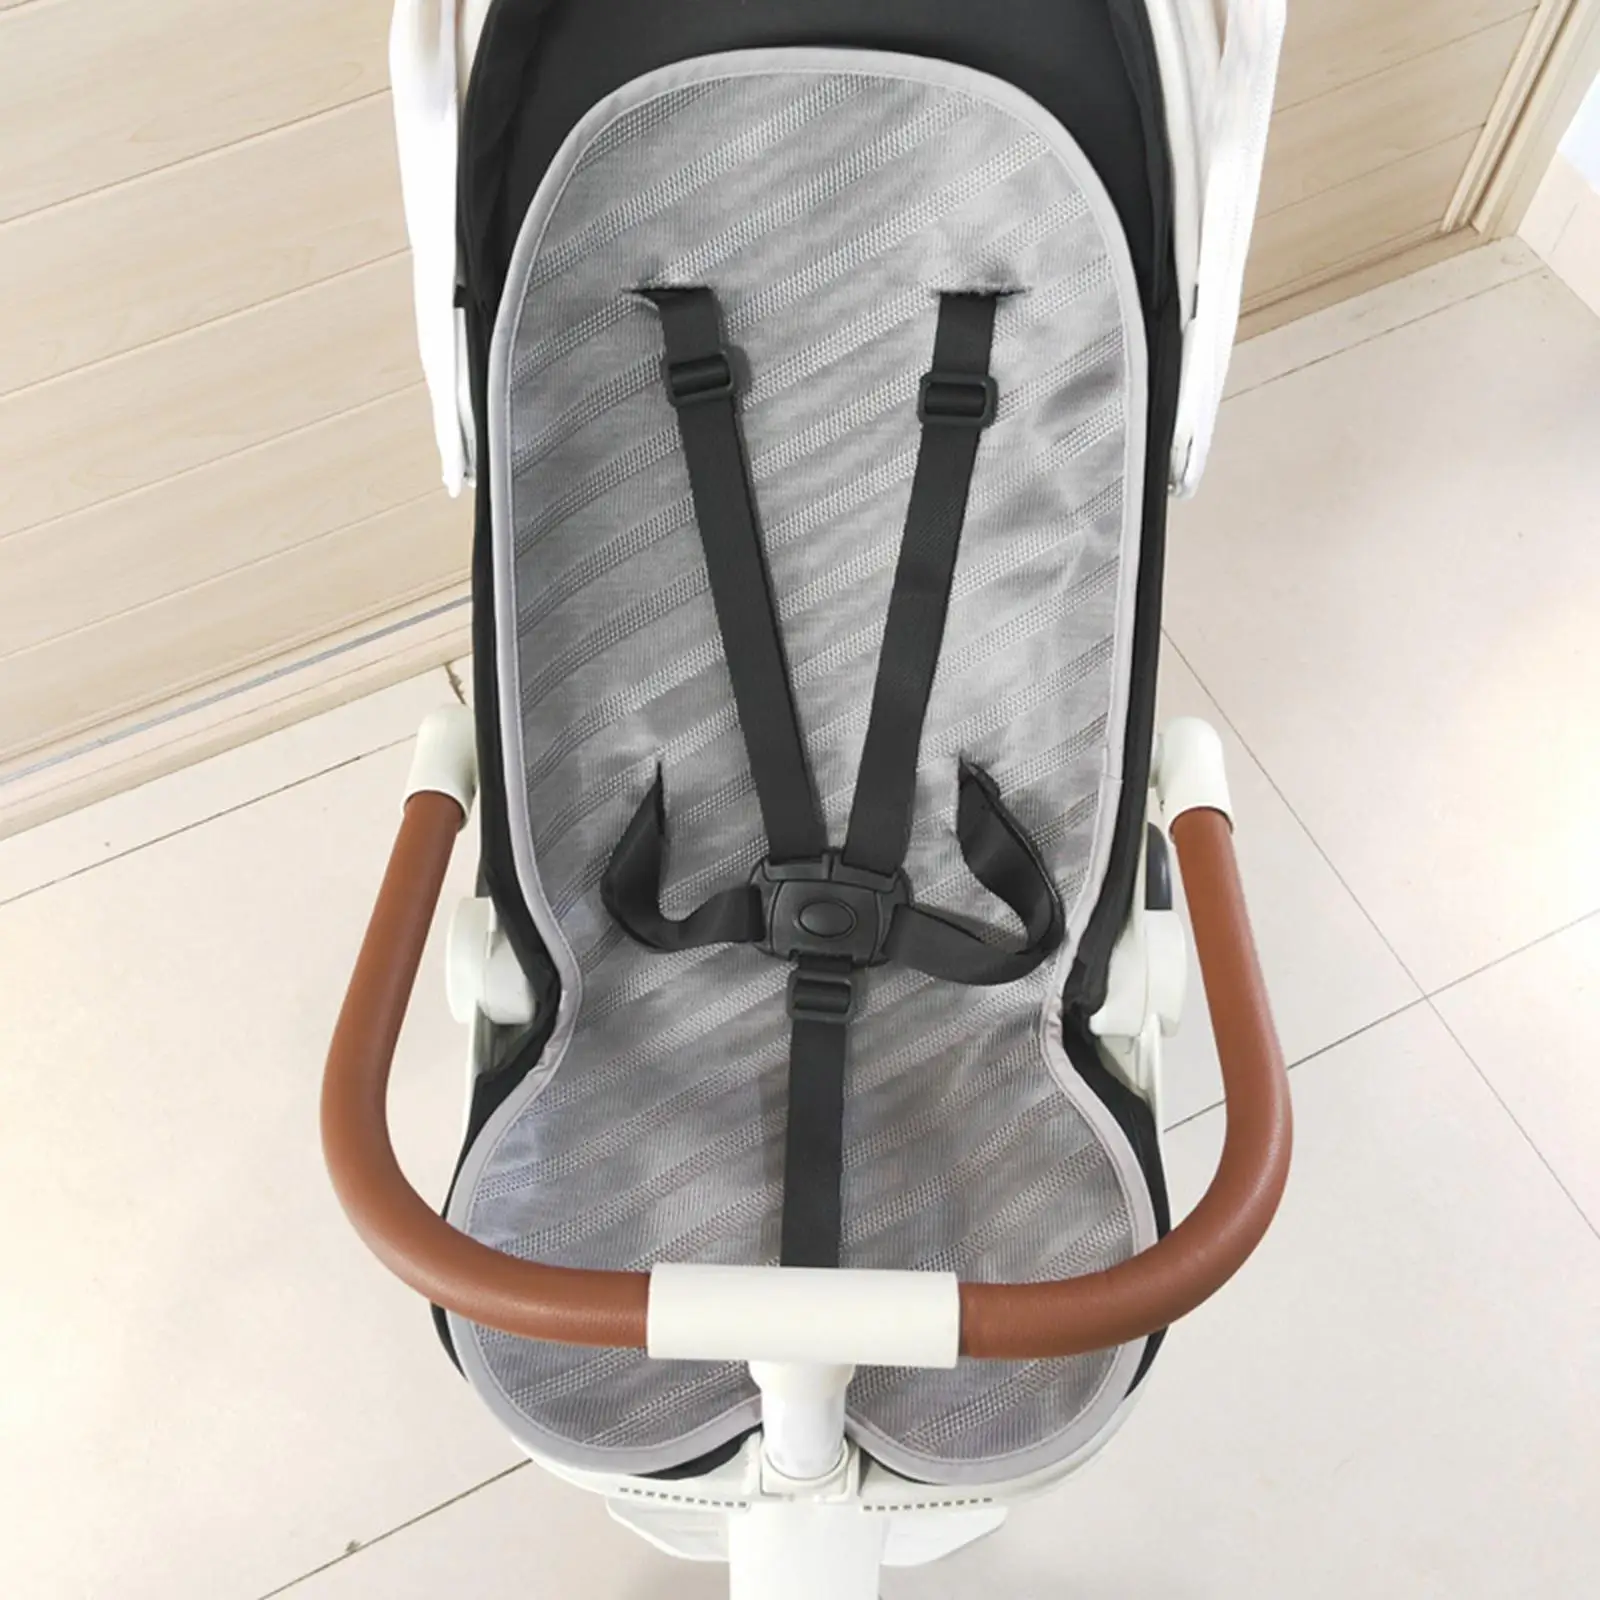 Pushchair Seat Cooling Mat Breathable Strollers Cool Seat Pad Summer Cooling Seat Pad for Child Safety Seat Trolley Pram